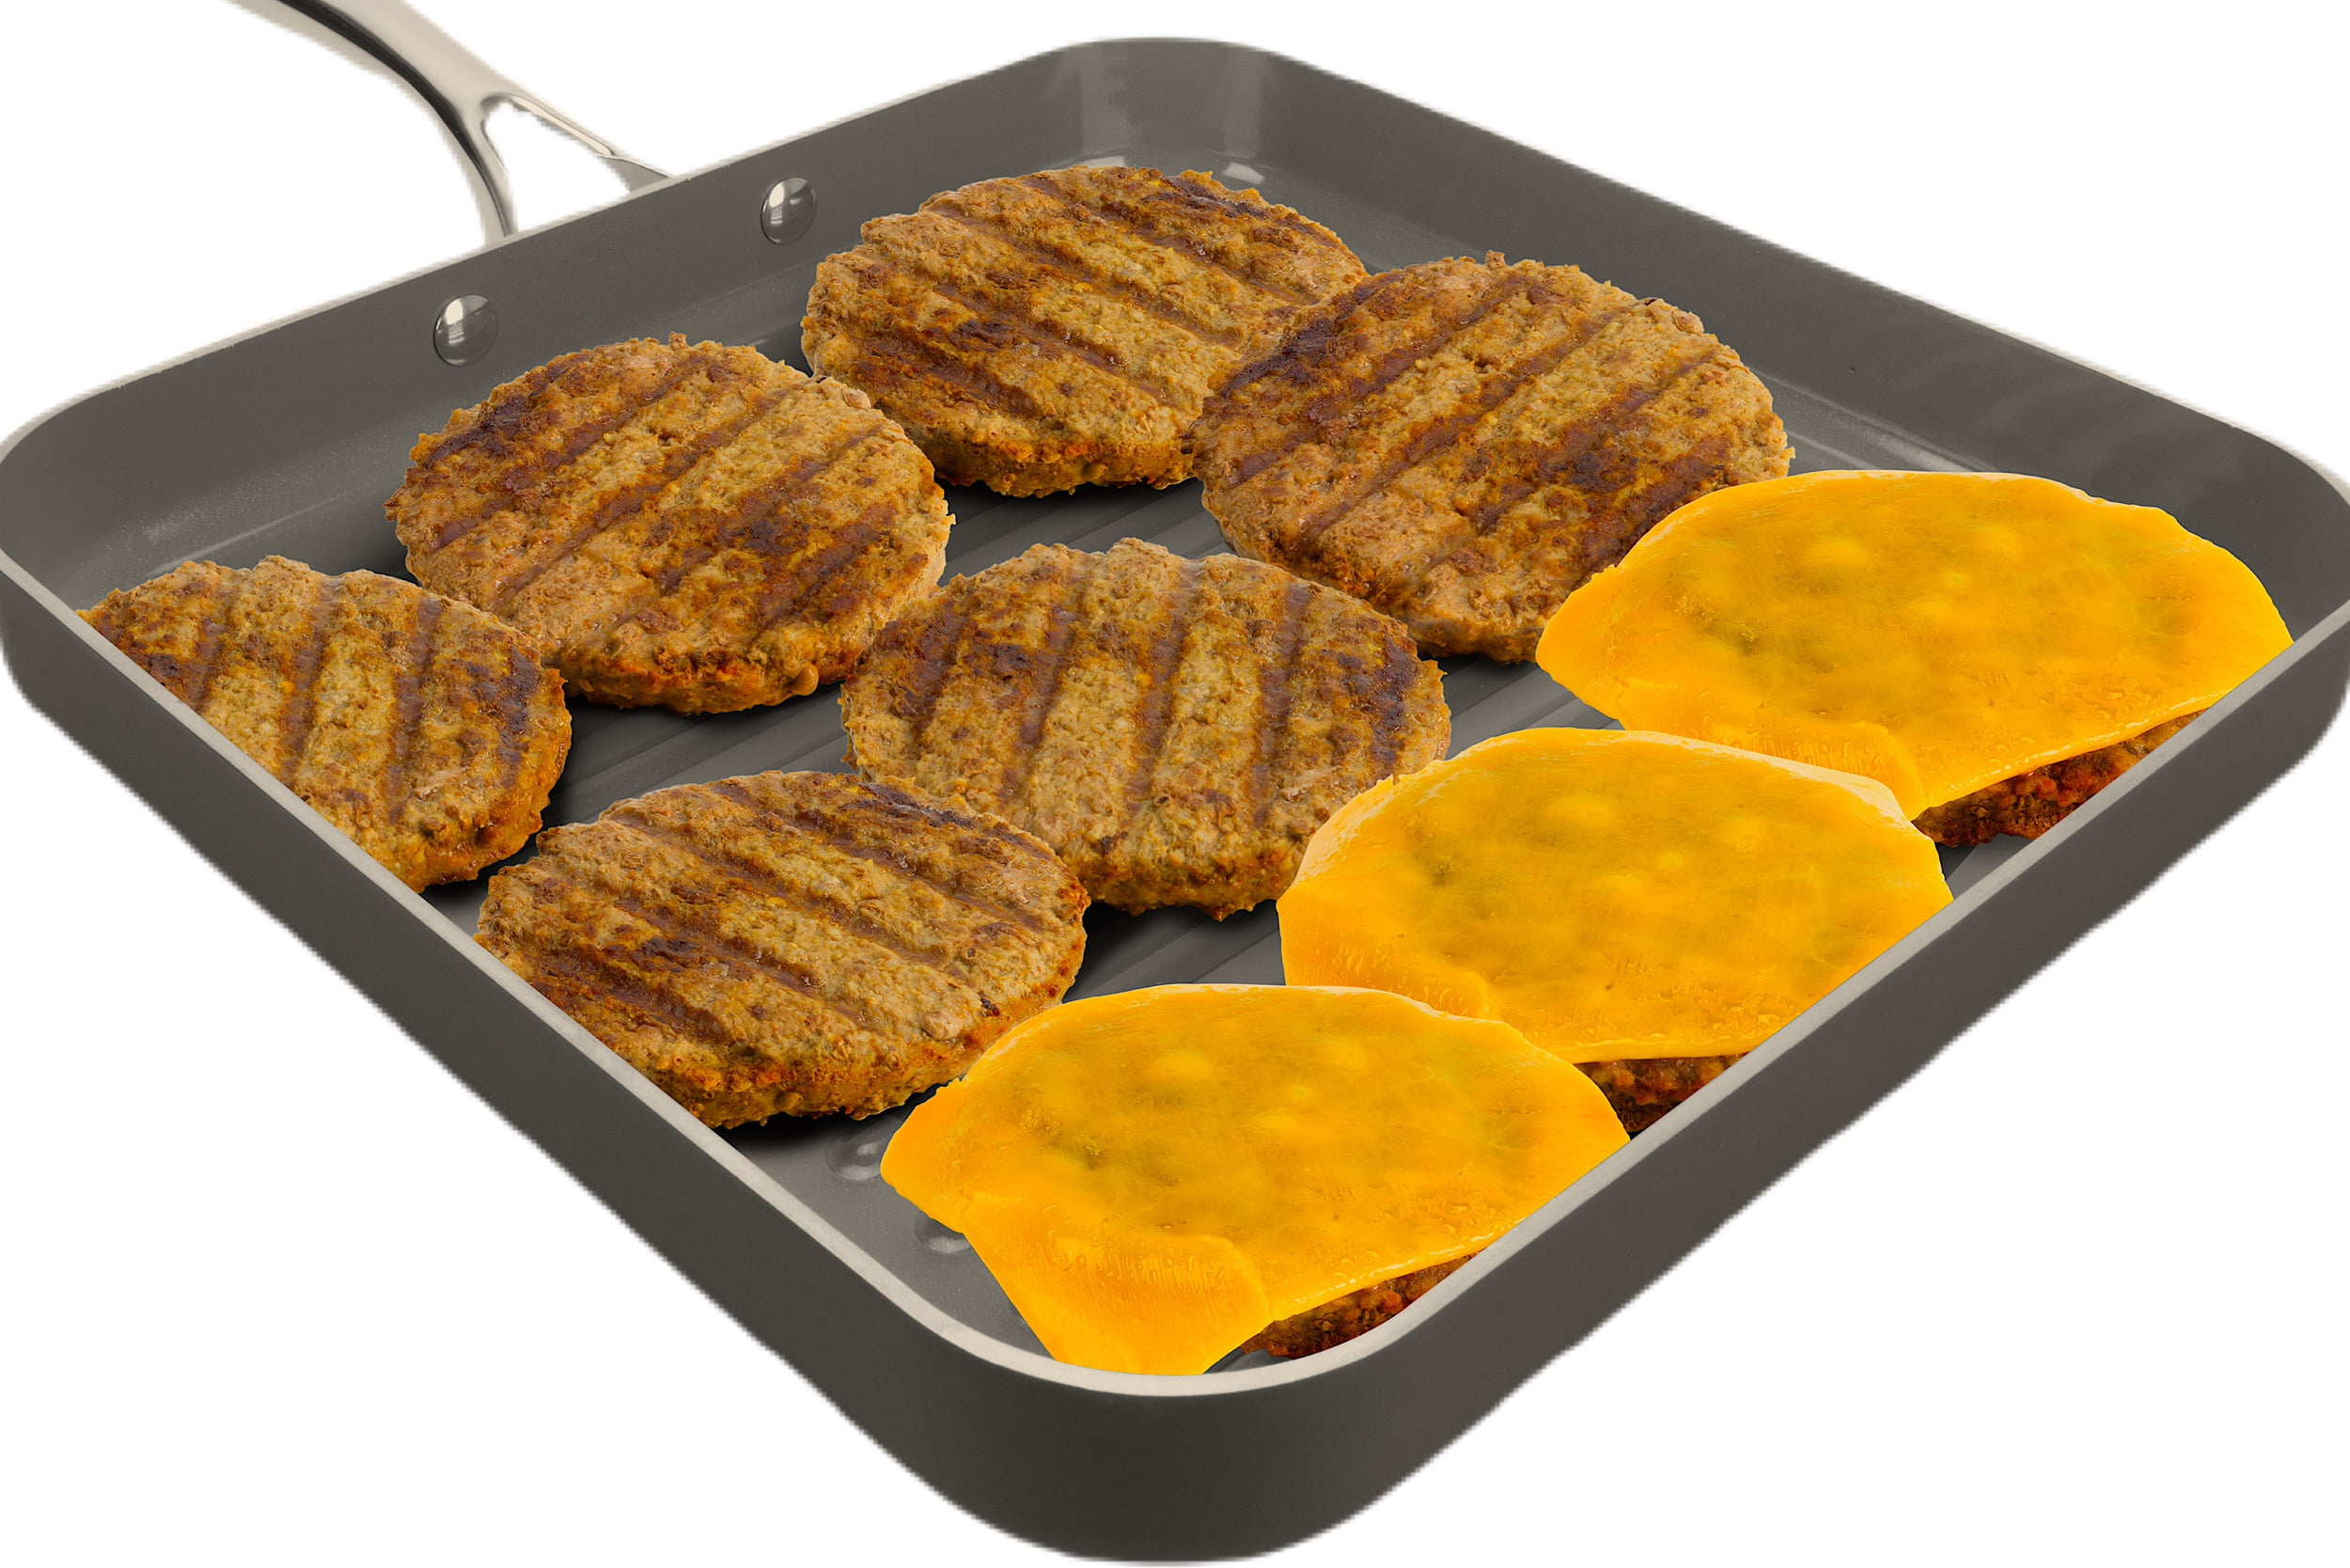 Eazy Mealz Non-Stick Square Grill Pan, Large, 10.5'/BLUE